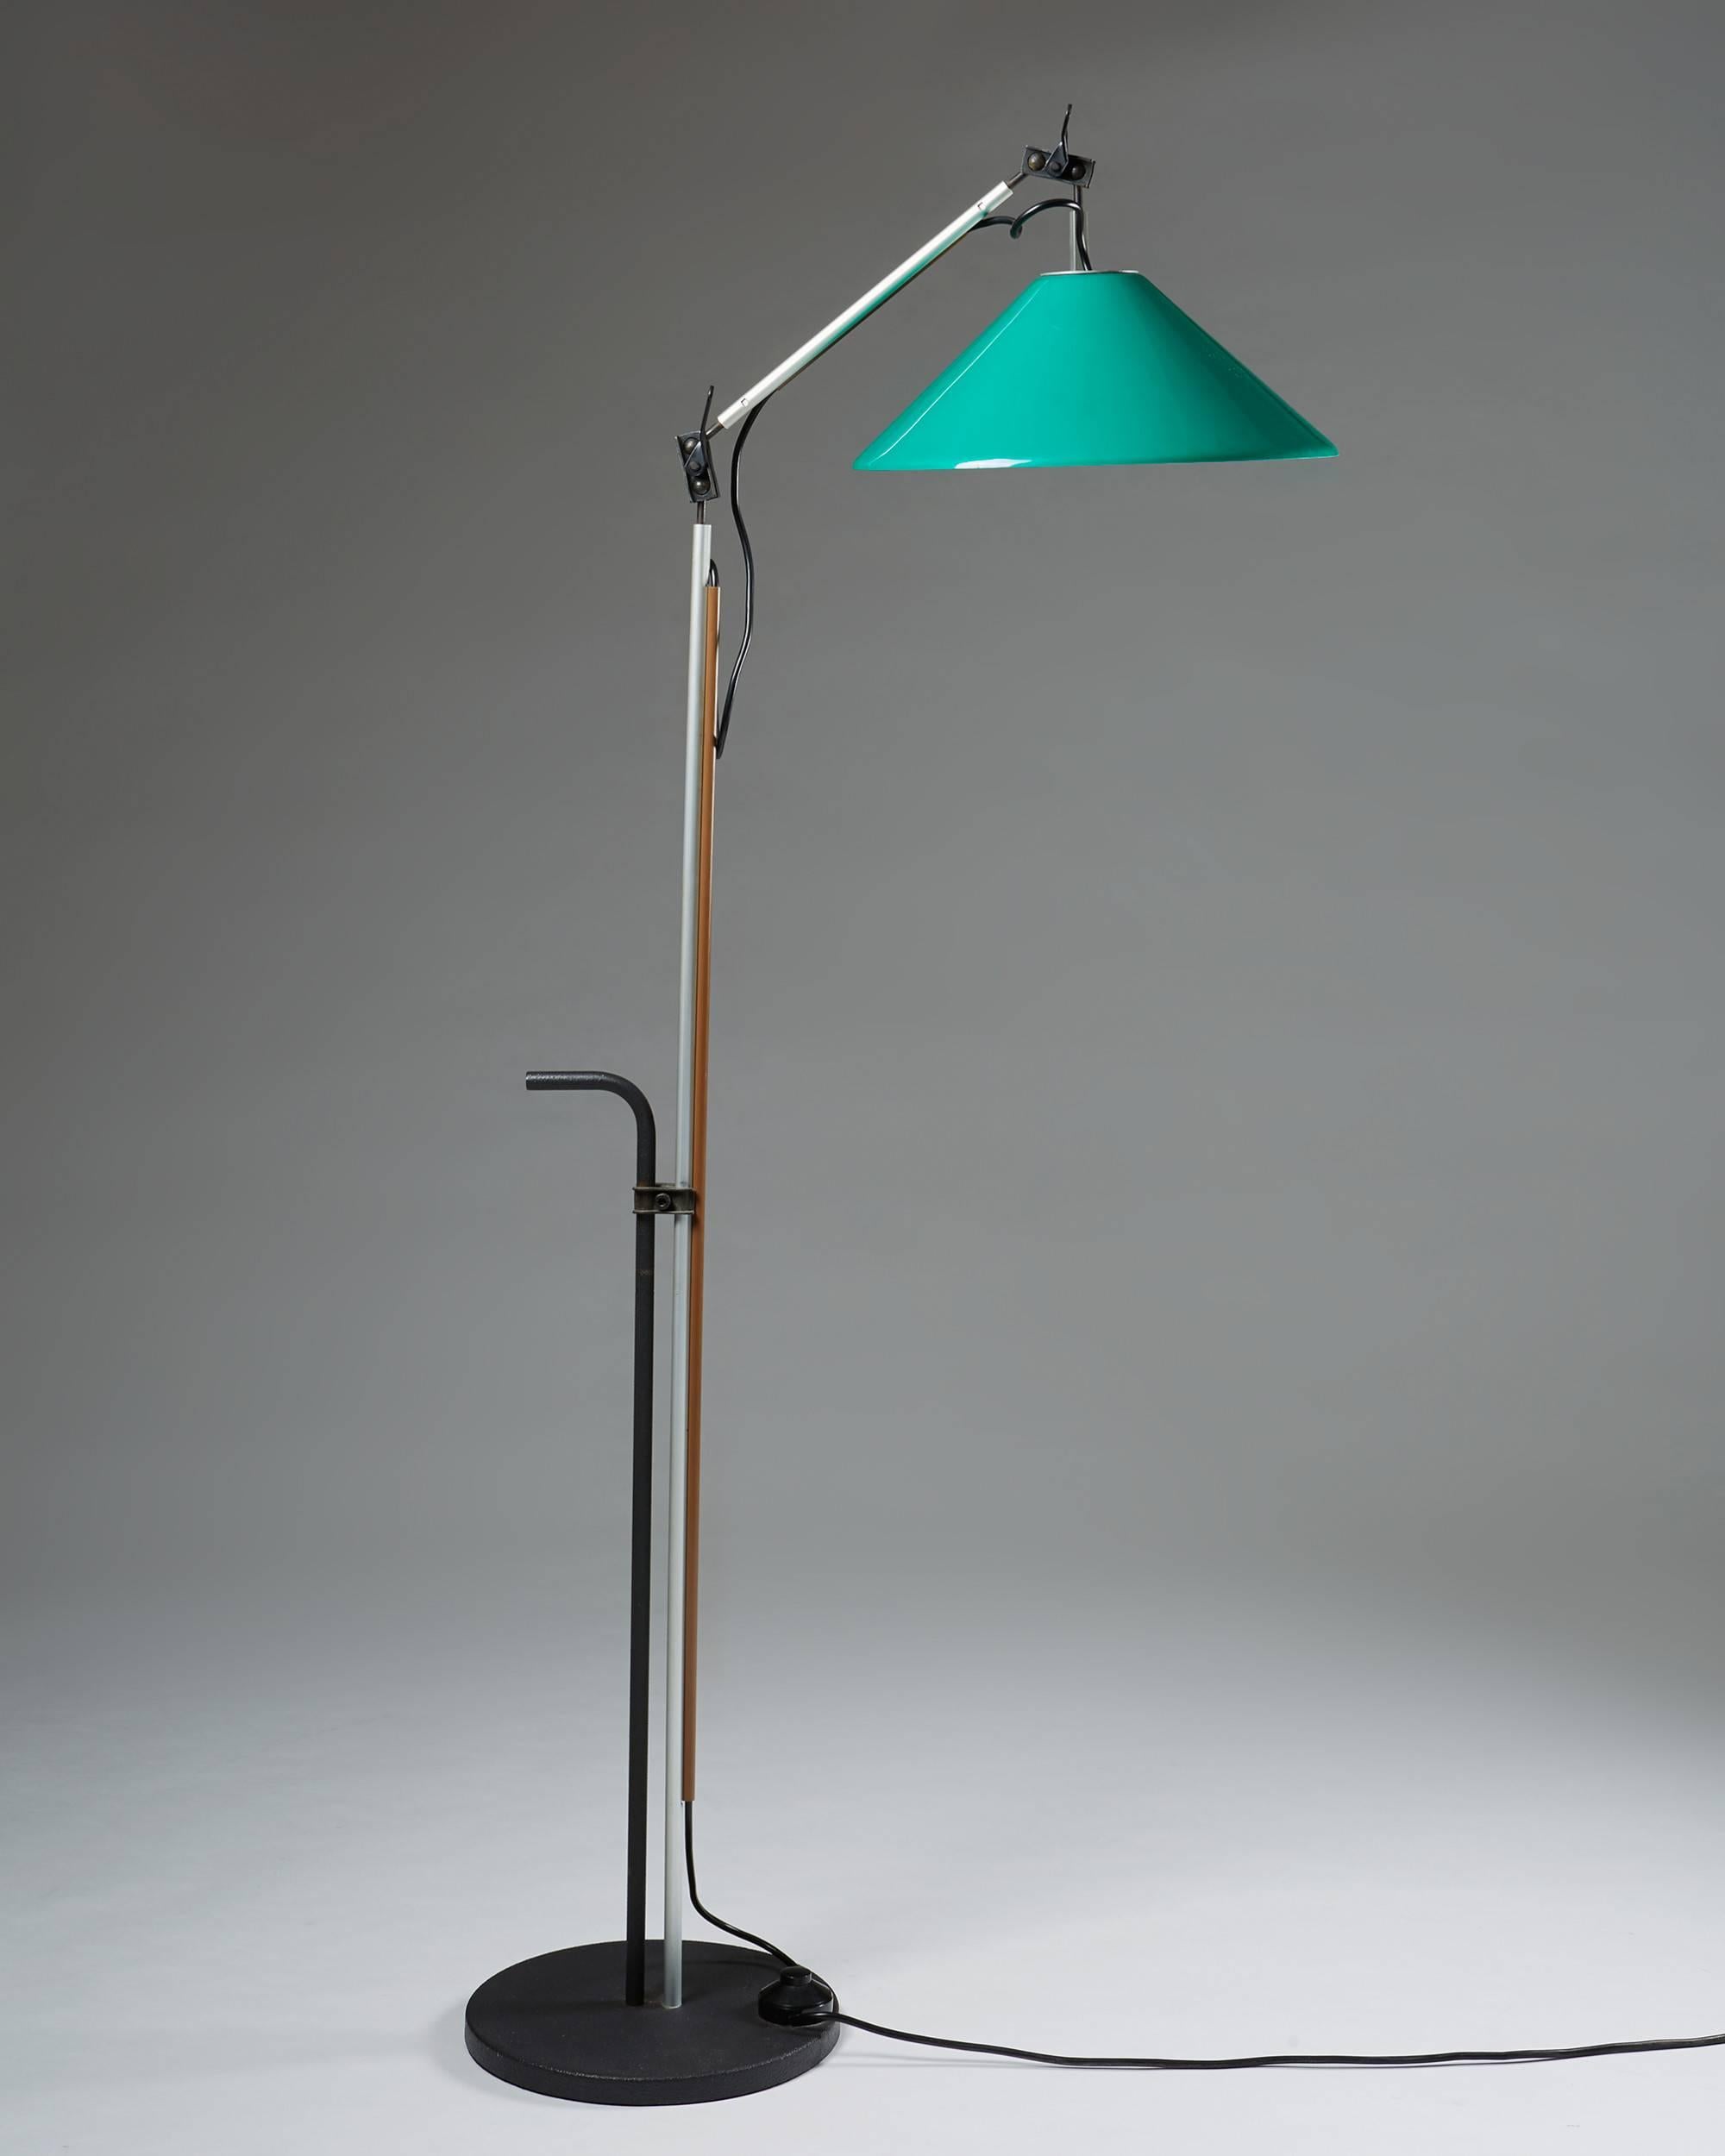 Adjustable floor lamp designed by Enzo Mari for Artemide, Italy, 1970s.

Lacqured iron, steel and plexi.

Measures: Hight adjustable, max: 190 cm/ 6' 3''
Diameter of the shade 38.5 cm/ 15 1/4''.